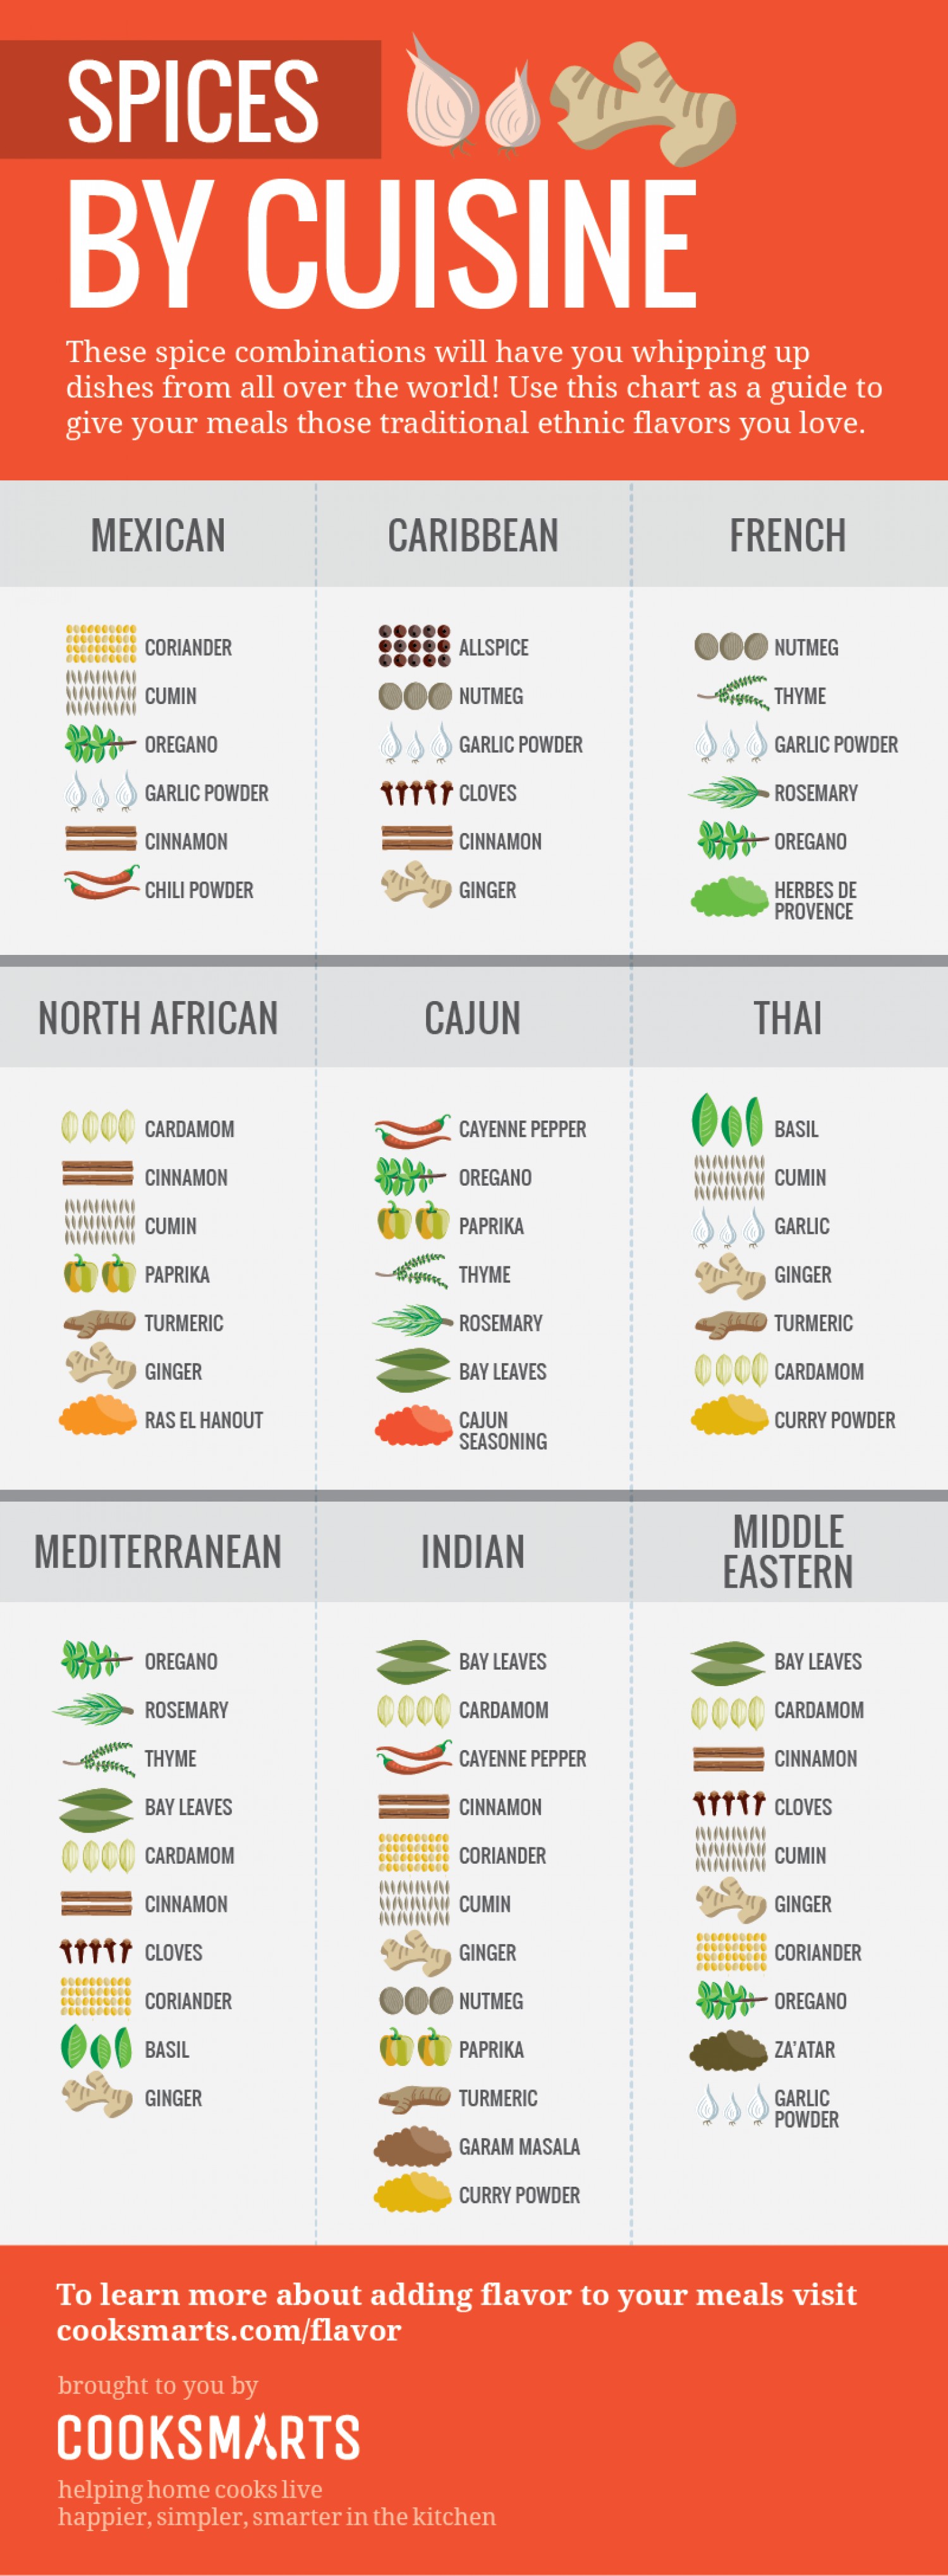 Spices by cuisine